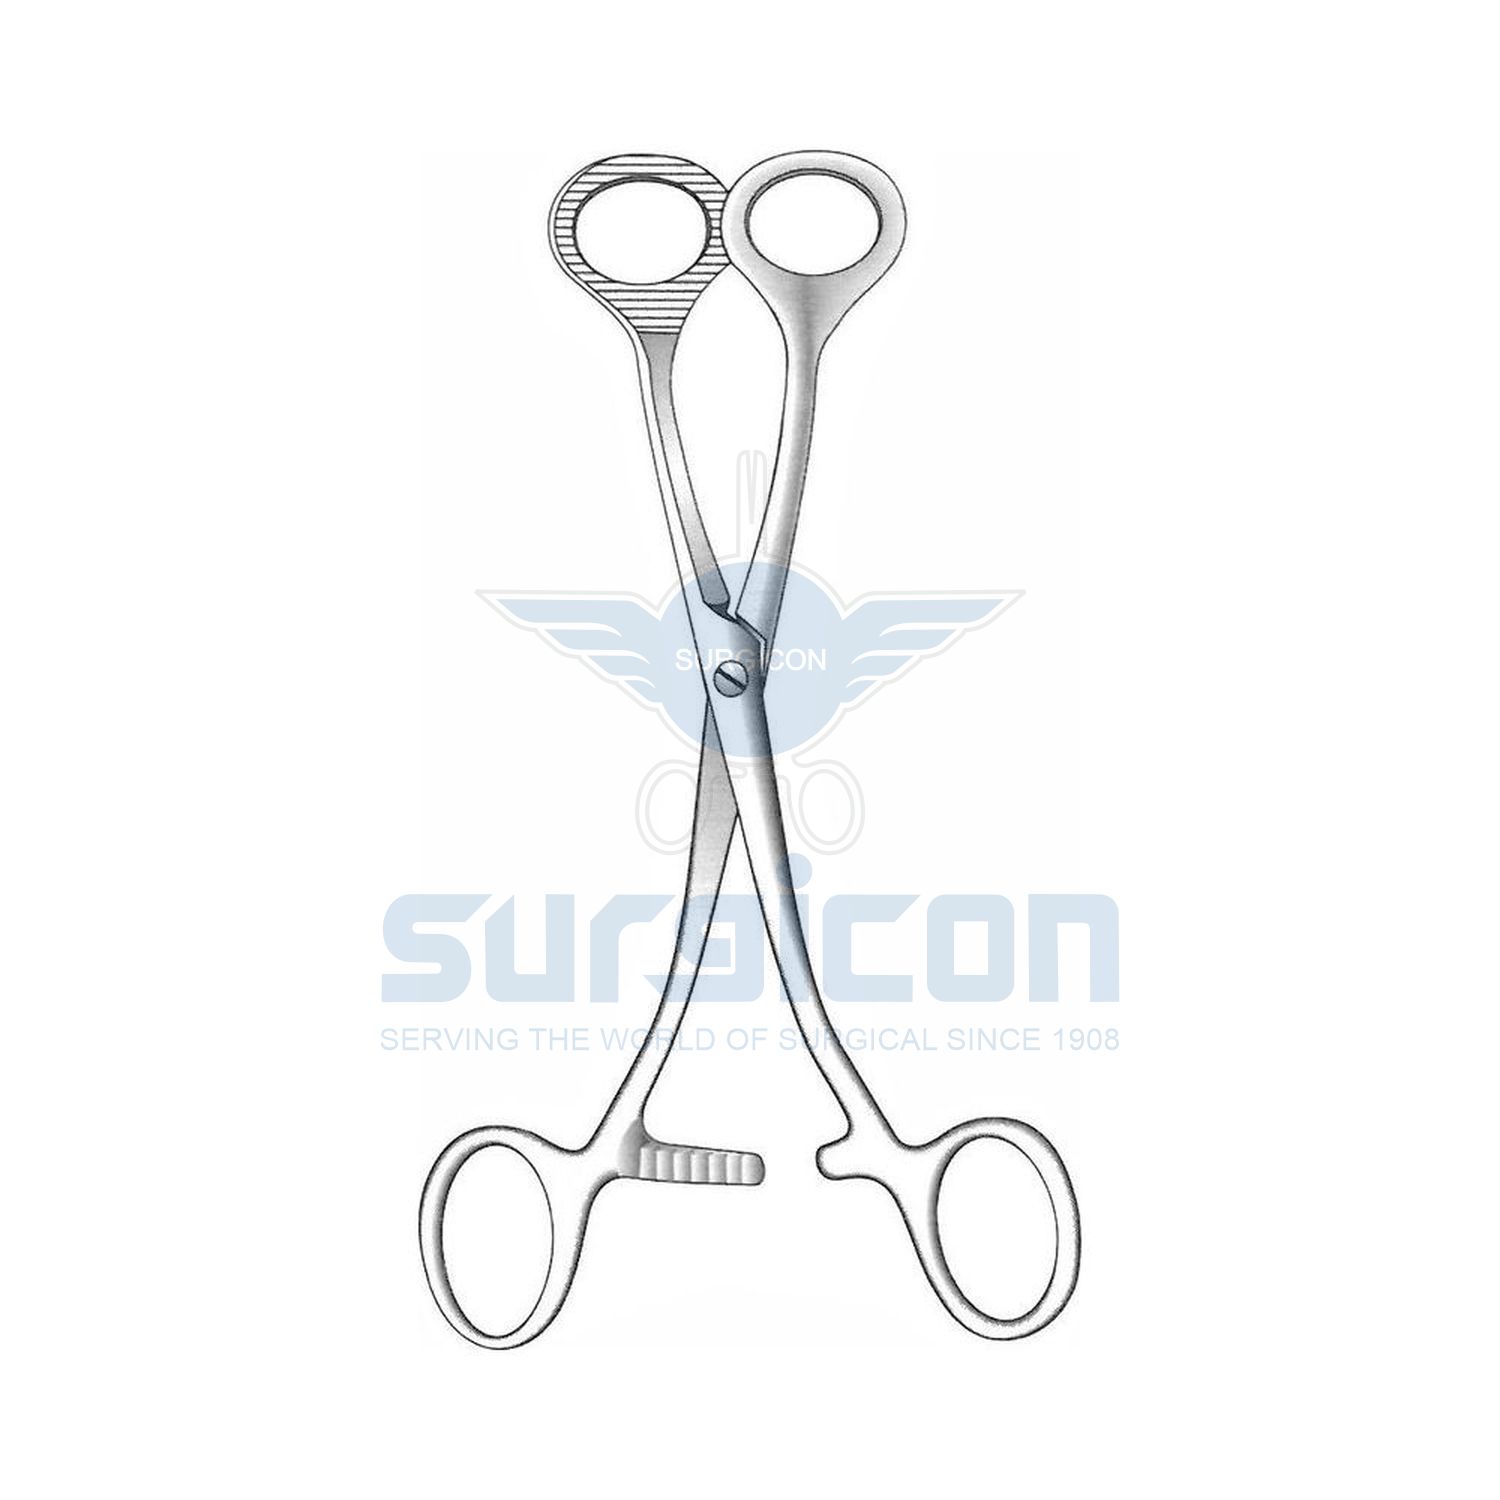 Collin-Tongue-Holding-Forcep-J-33-509